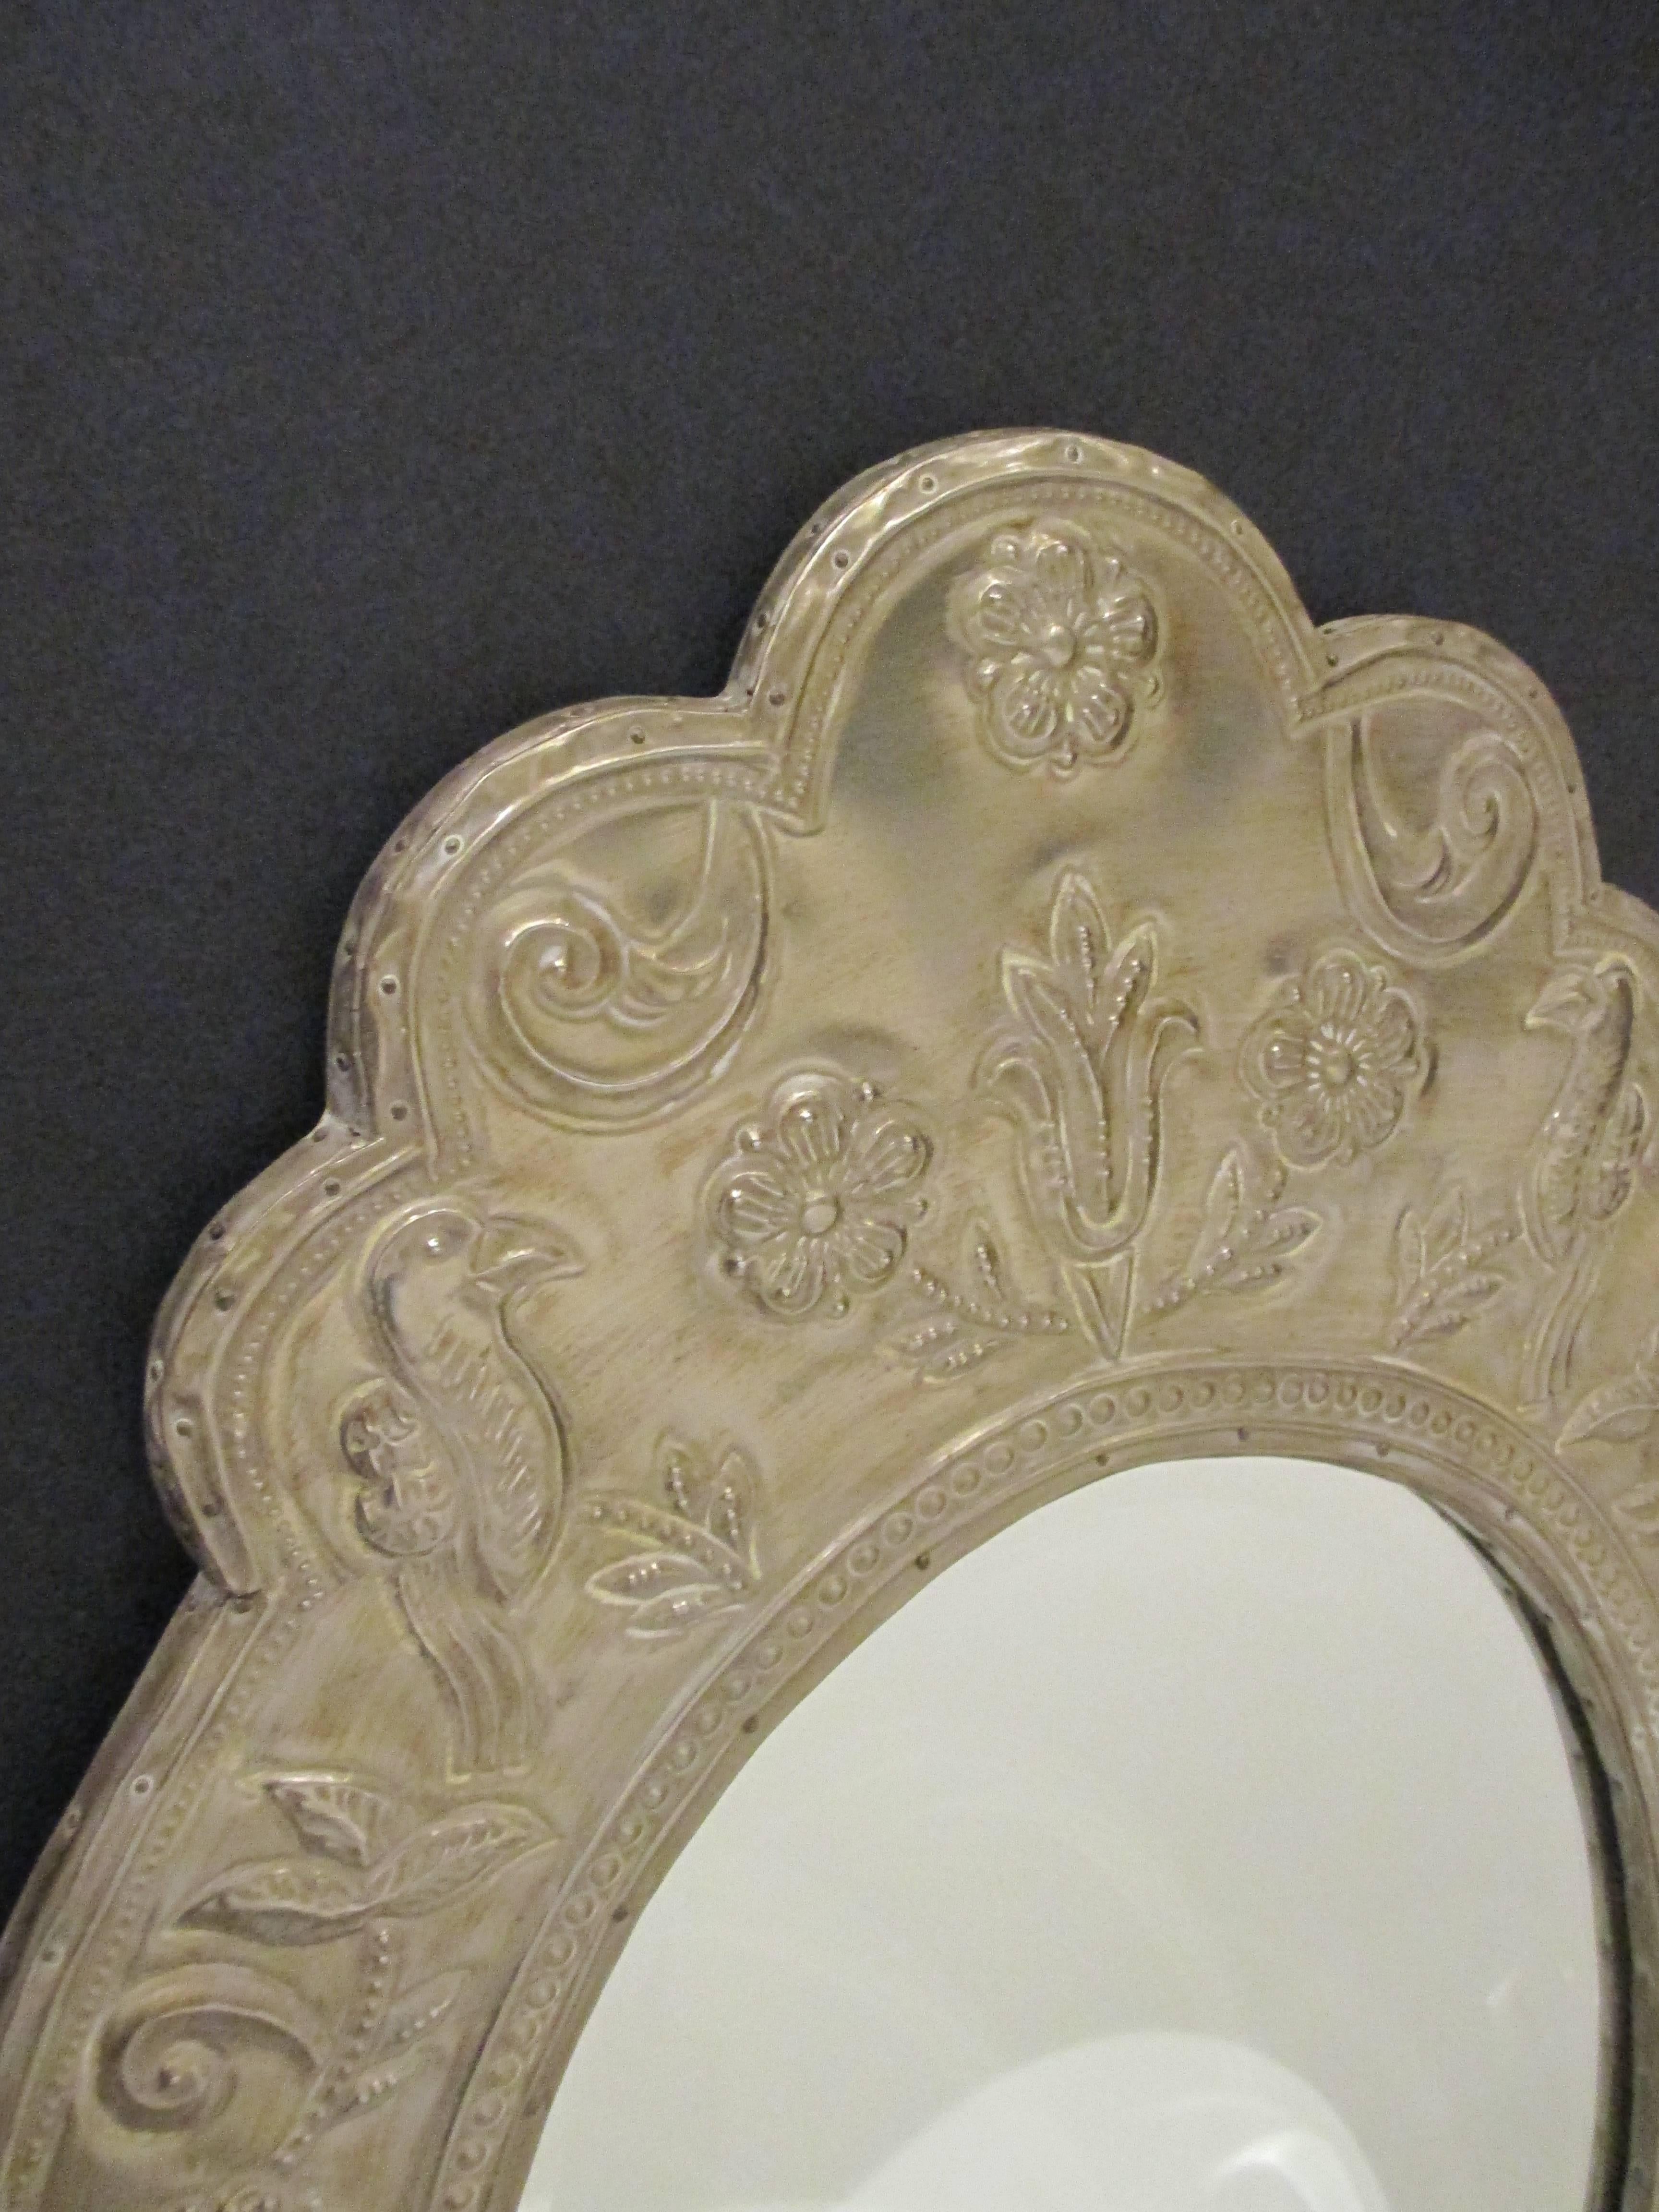 Oval metal clad mirror.
Tin antiqued finish.
Clear centre mirror panel with bevel.
Overall size: H 32